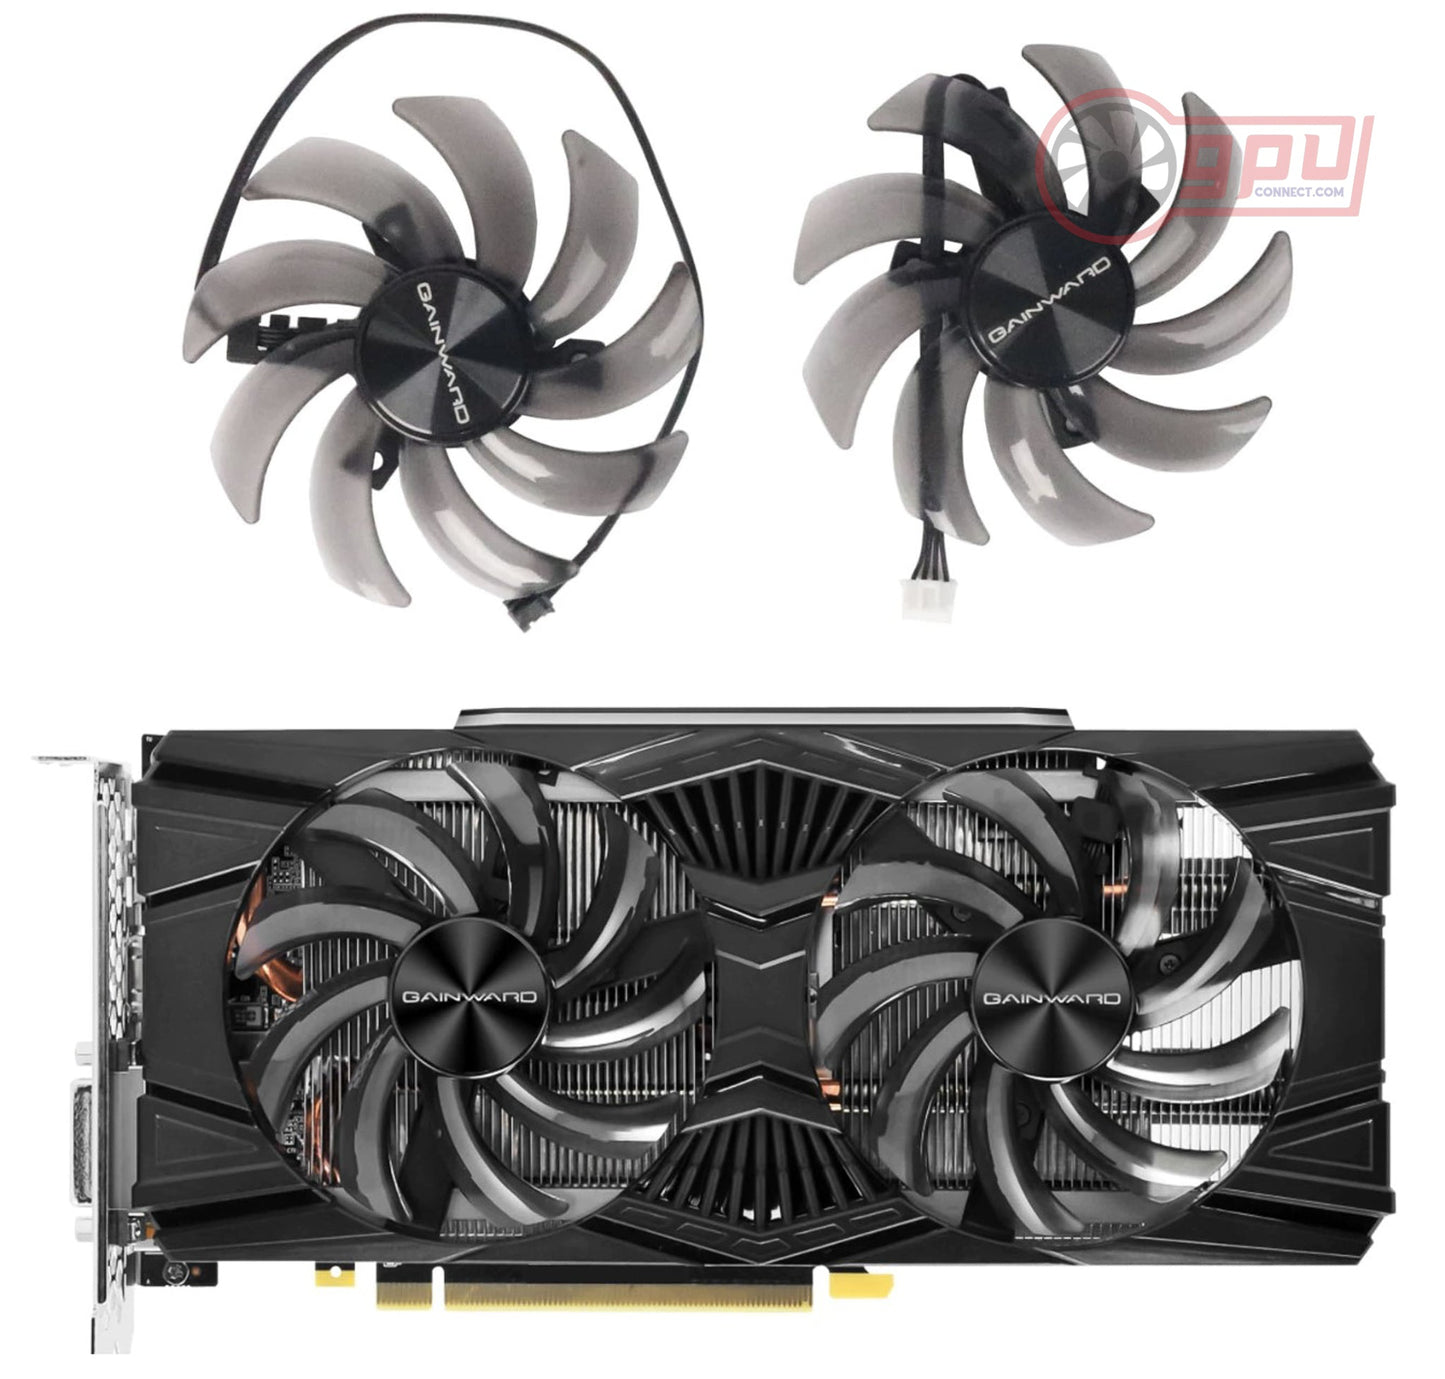 Gainward RTX 2060 2070 SUPER Ghost Replacement Graphics Card Cooler - GPUCONNECT.COM